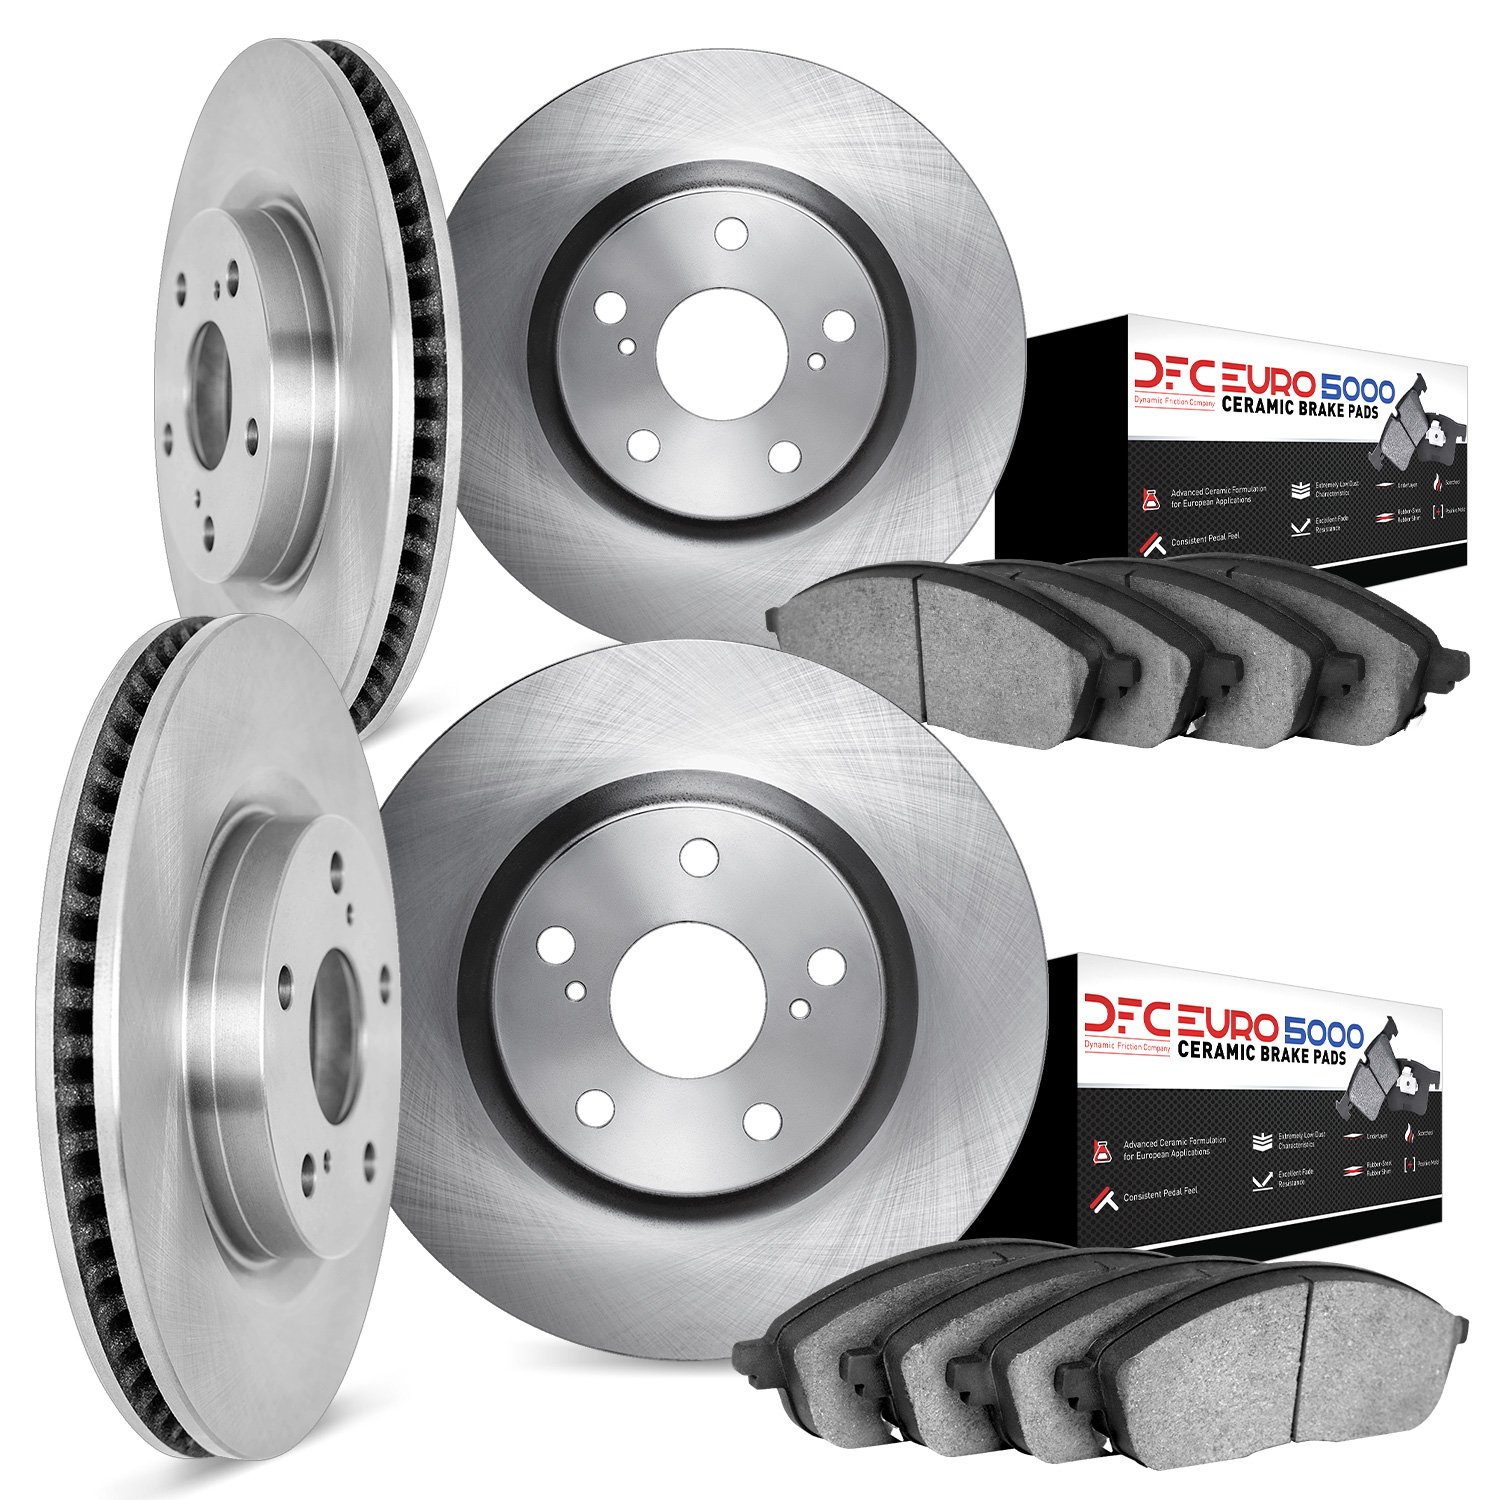 6604-11421 Brake Rotors w/5000 Euro Ceramic Brake Pads, 2016-2016 Volvo, Position: Front and Rear